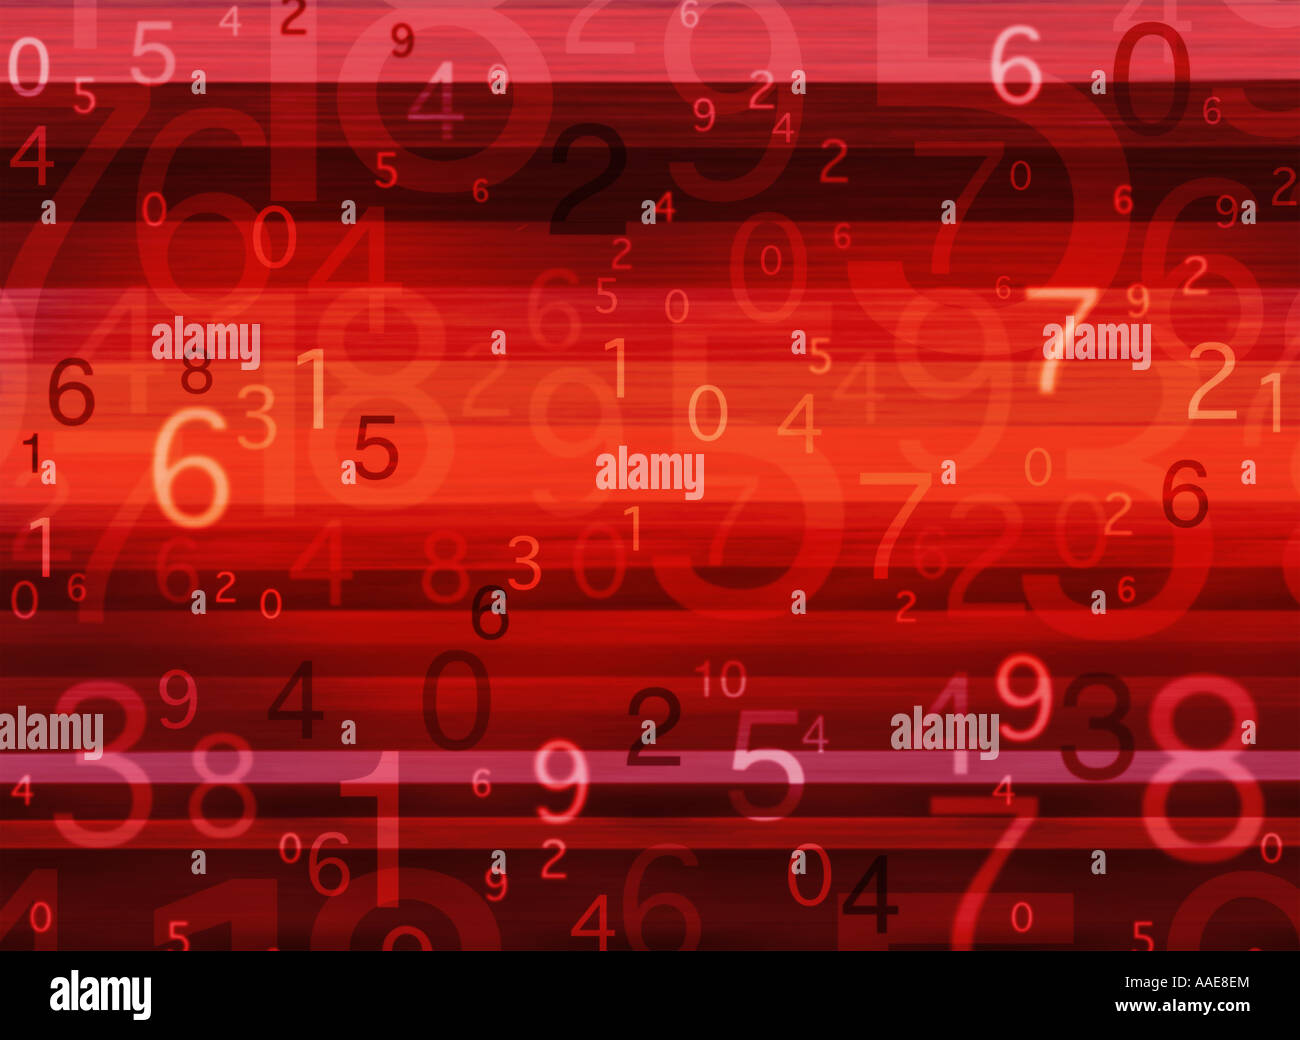 Abstract number illustration Stock Photo